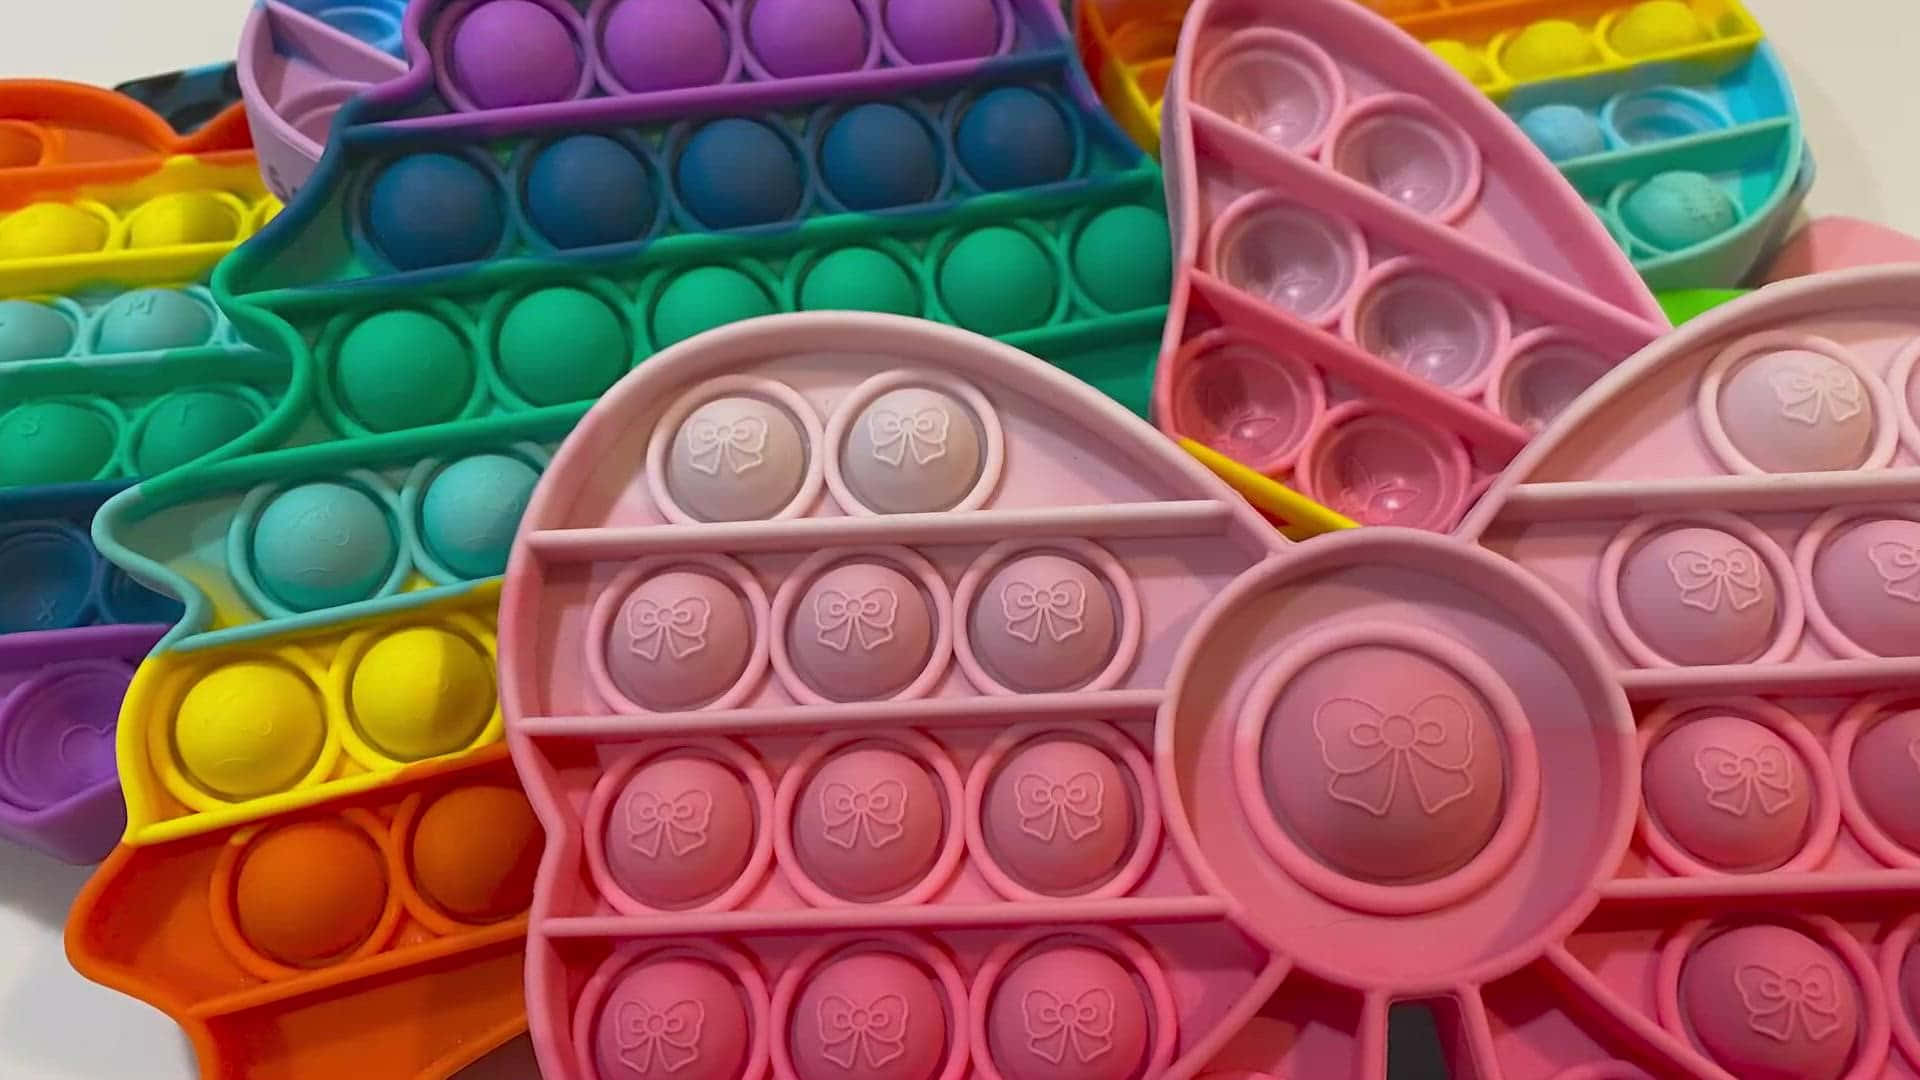 A Tray Of Colorful Eggs With A Bow On Top